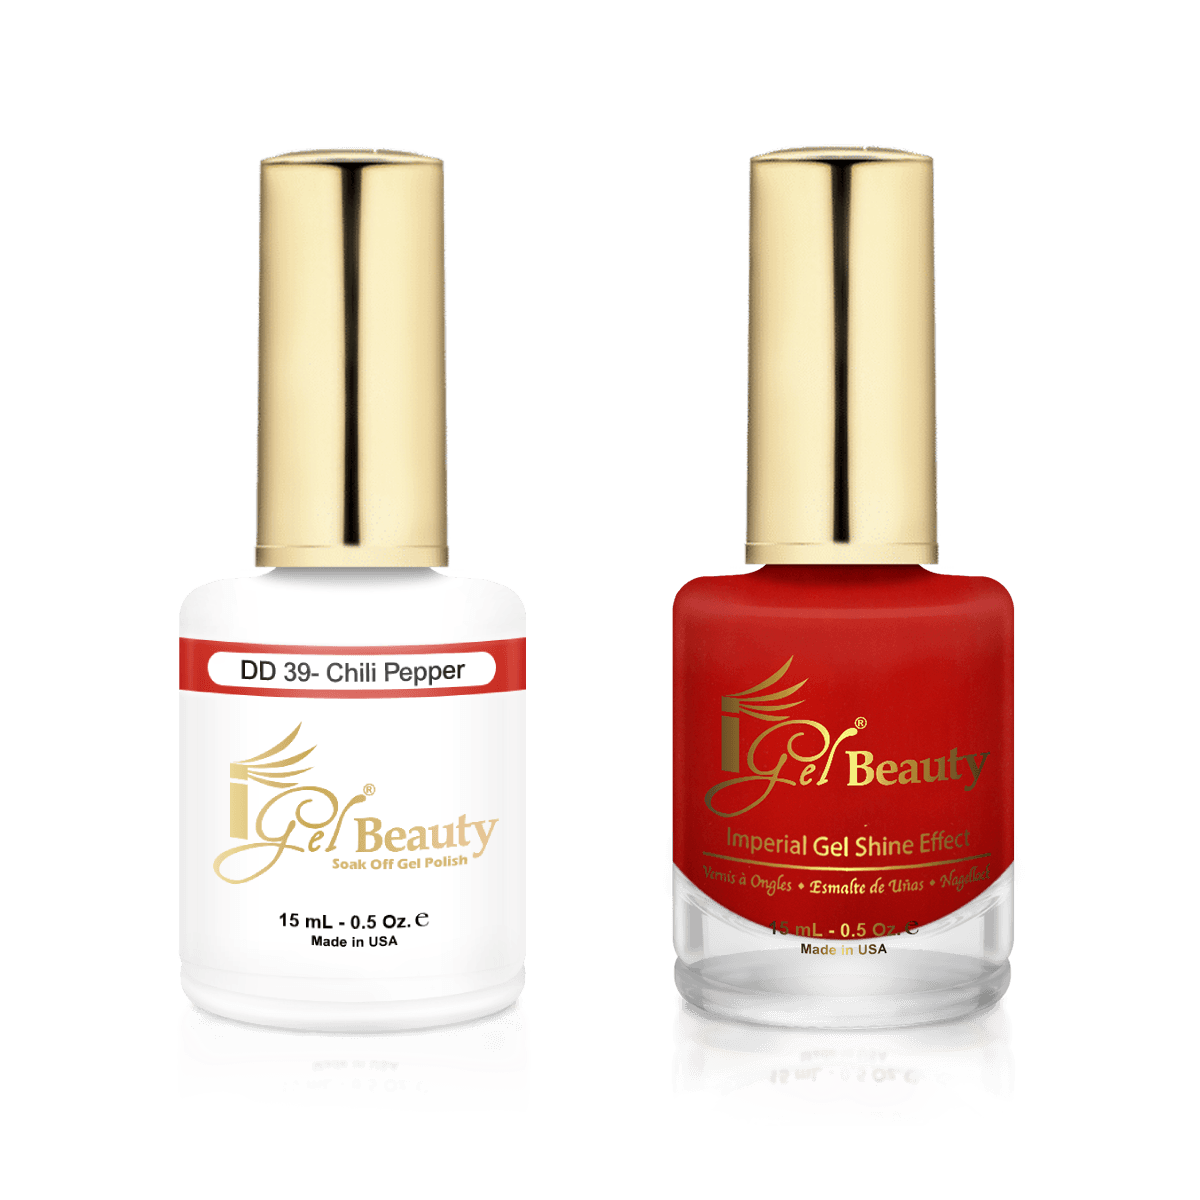 IGel Duo Gel Polish + Matching Nail Lacquer DD 39 CHILI PEPPER